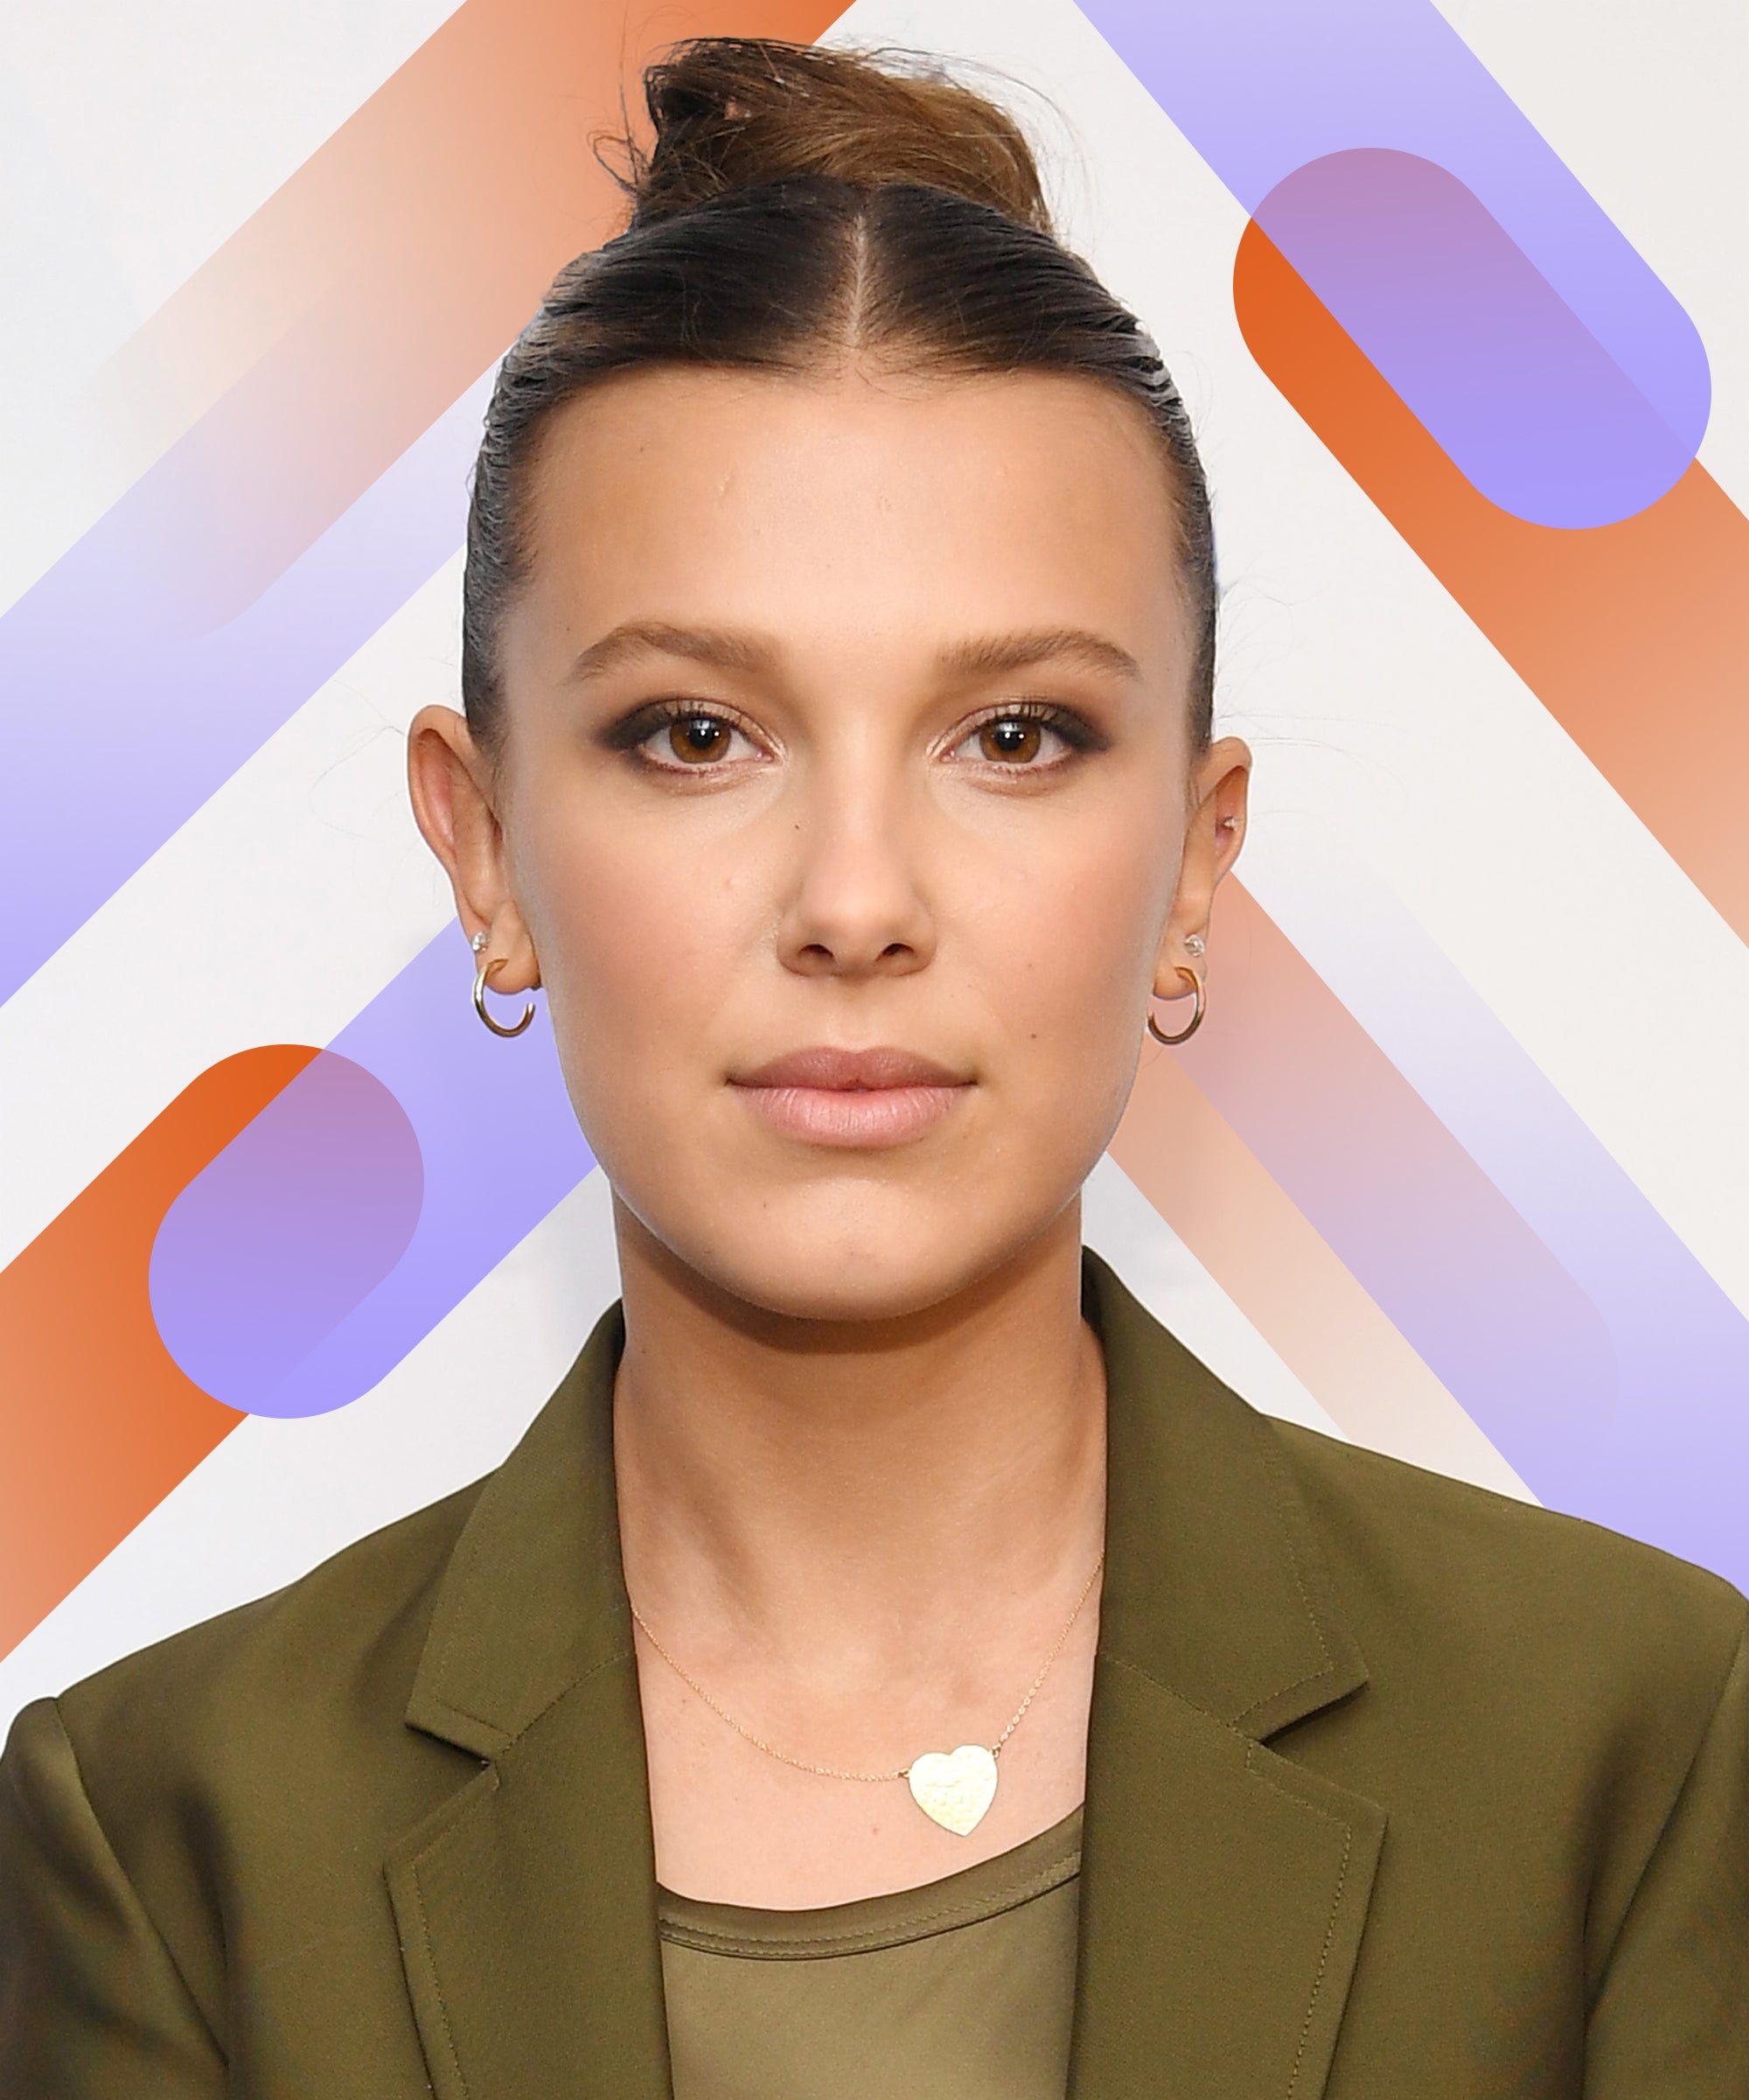 Millie Bobby Brown Launches Gen Z Makeup and Skin-care Brand – WWD